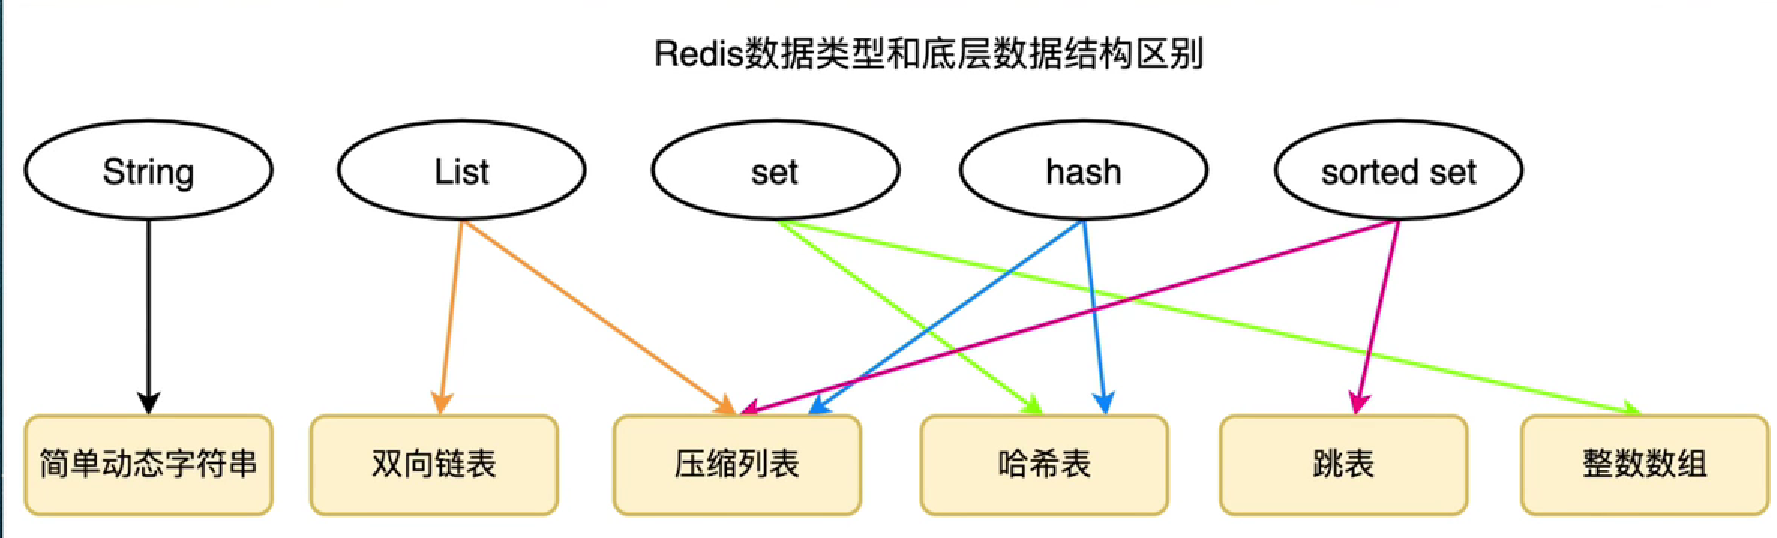 【<span style='color:red;'>Redis</span><span style='color:red;'>面试</span>题】<span style='color:red;'>Redis</span>常见<span style='color:red;'>的</span>一些高频<span style='color:red;'>面试</span>题